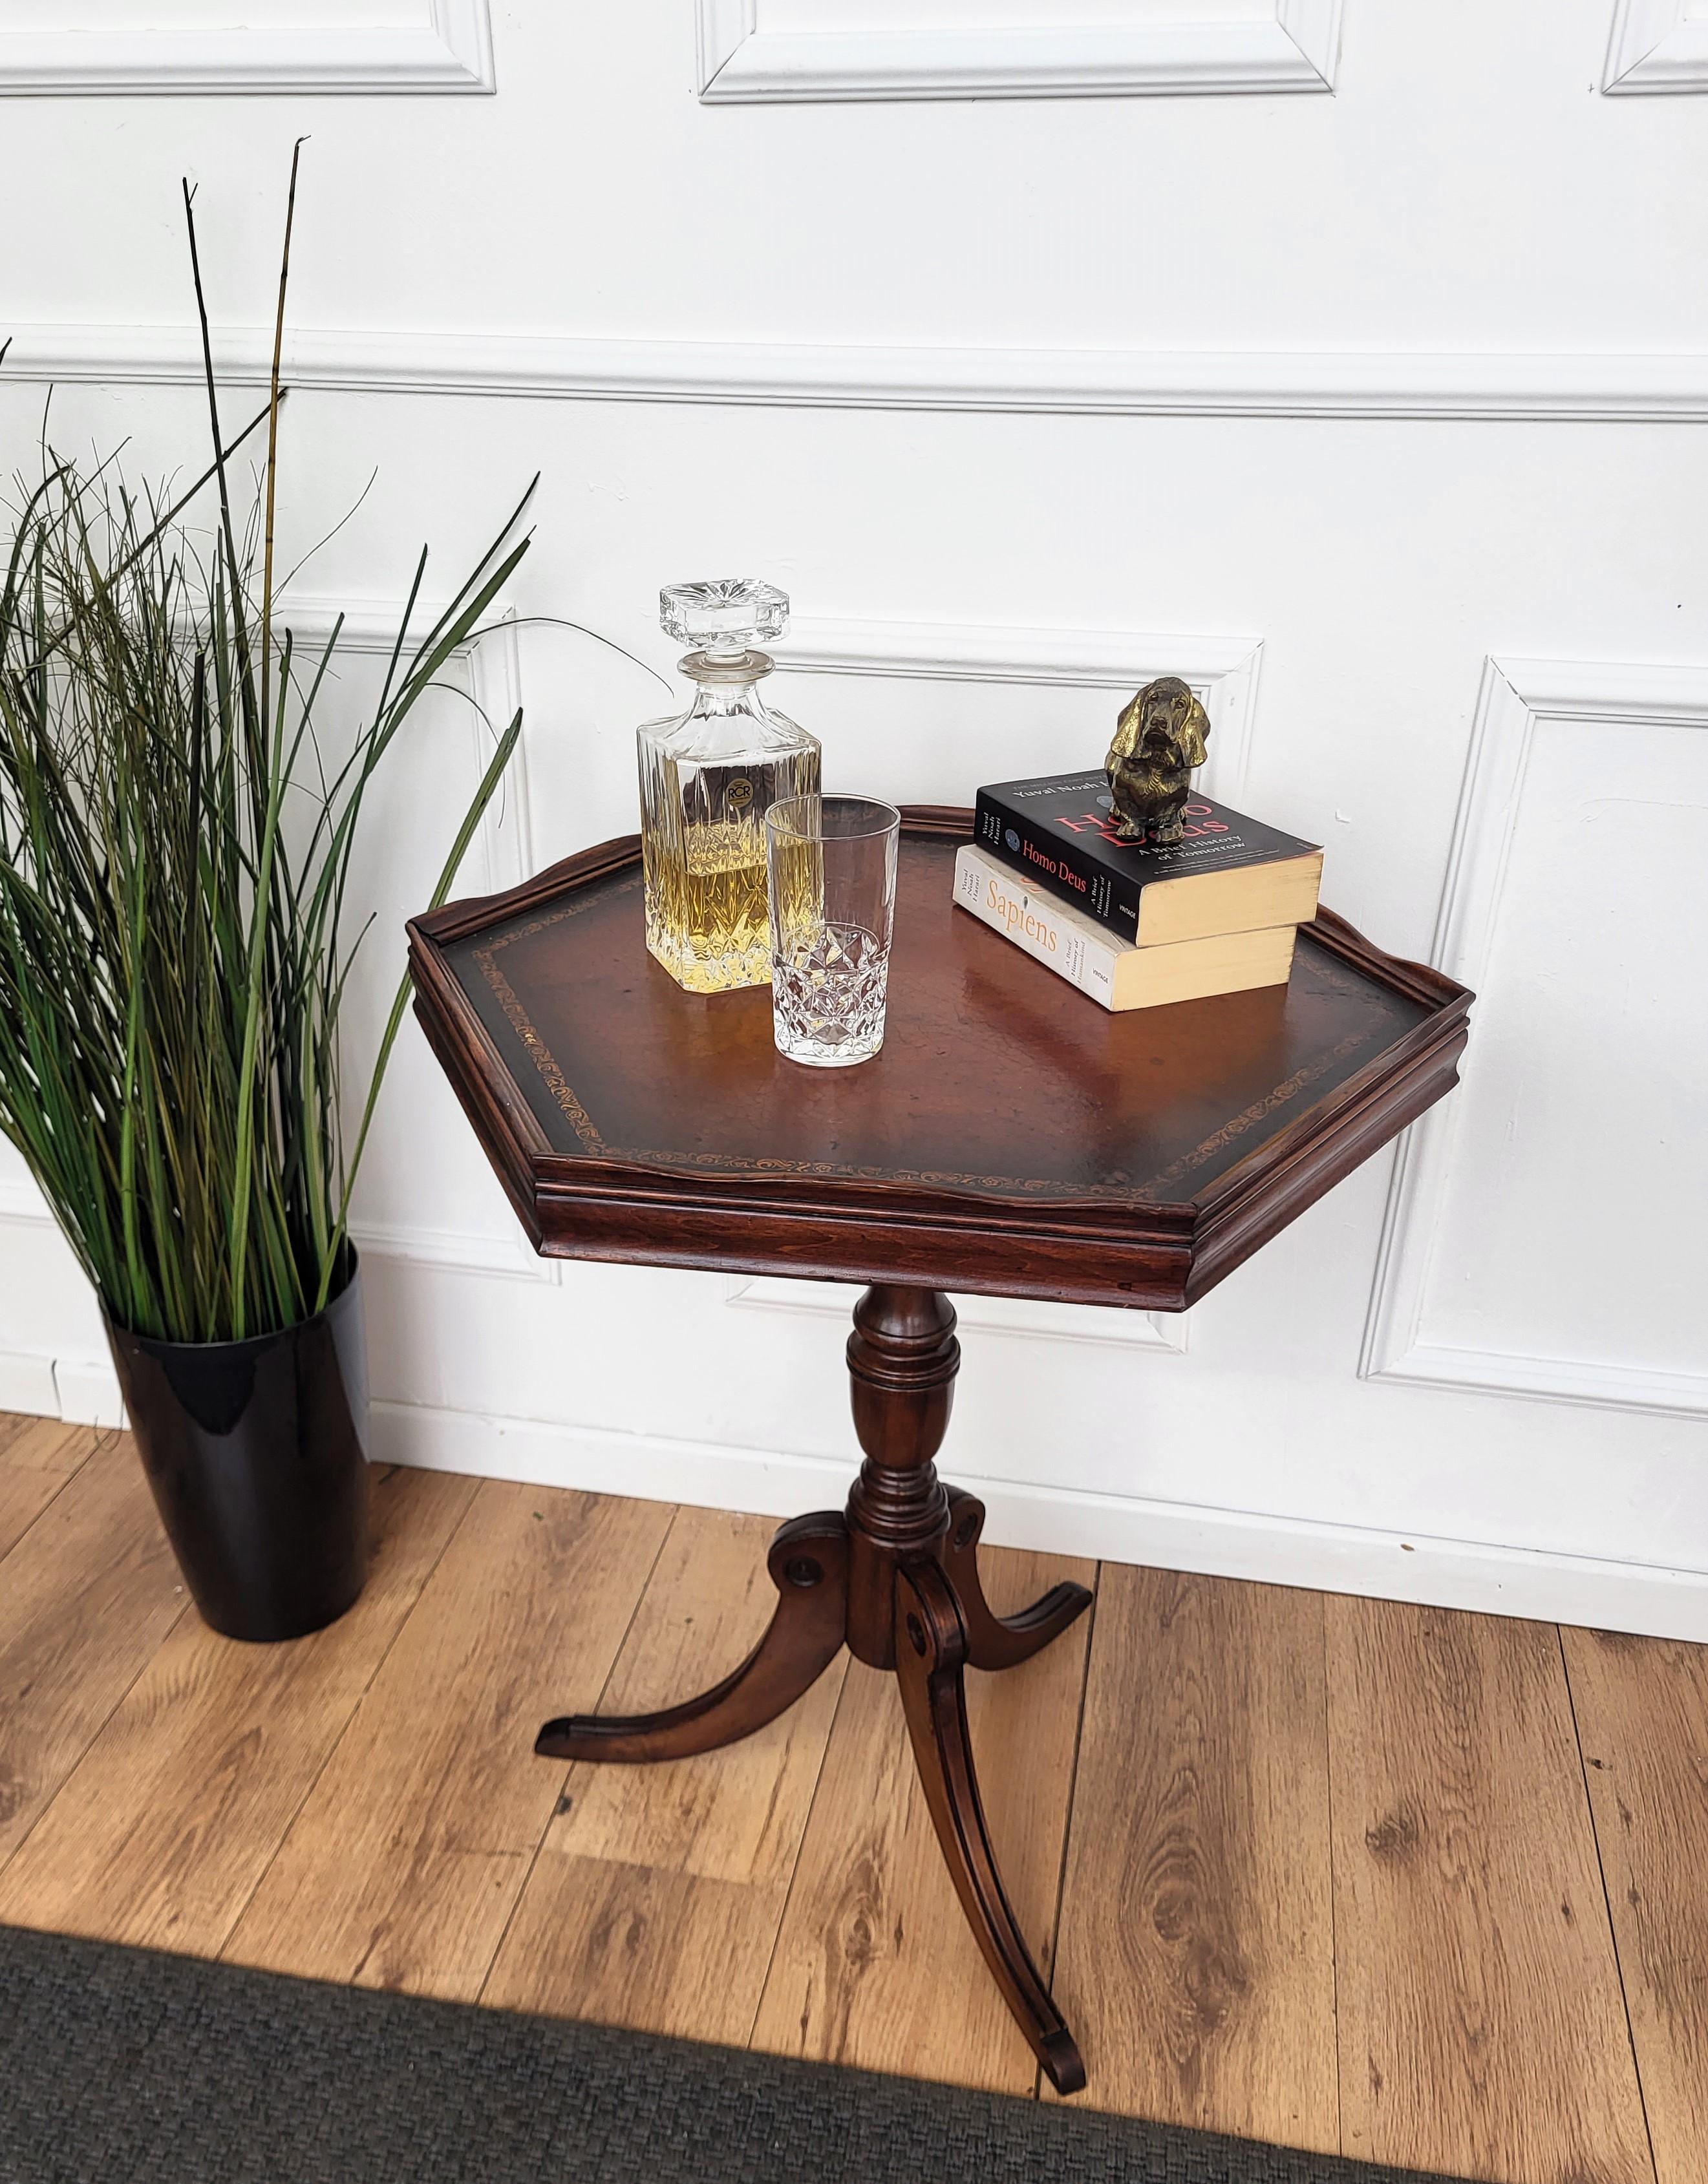 Beautiful and very elegant antique Italian solid walnut side table features an hexagonal top with gilt-framed leather standing on a central beautifully crafted leg and tripod feet. This Italian walnut side or coffee table with the rich and beautiful